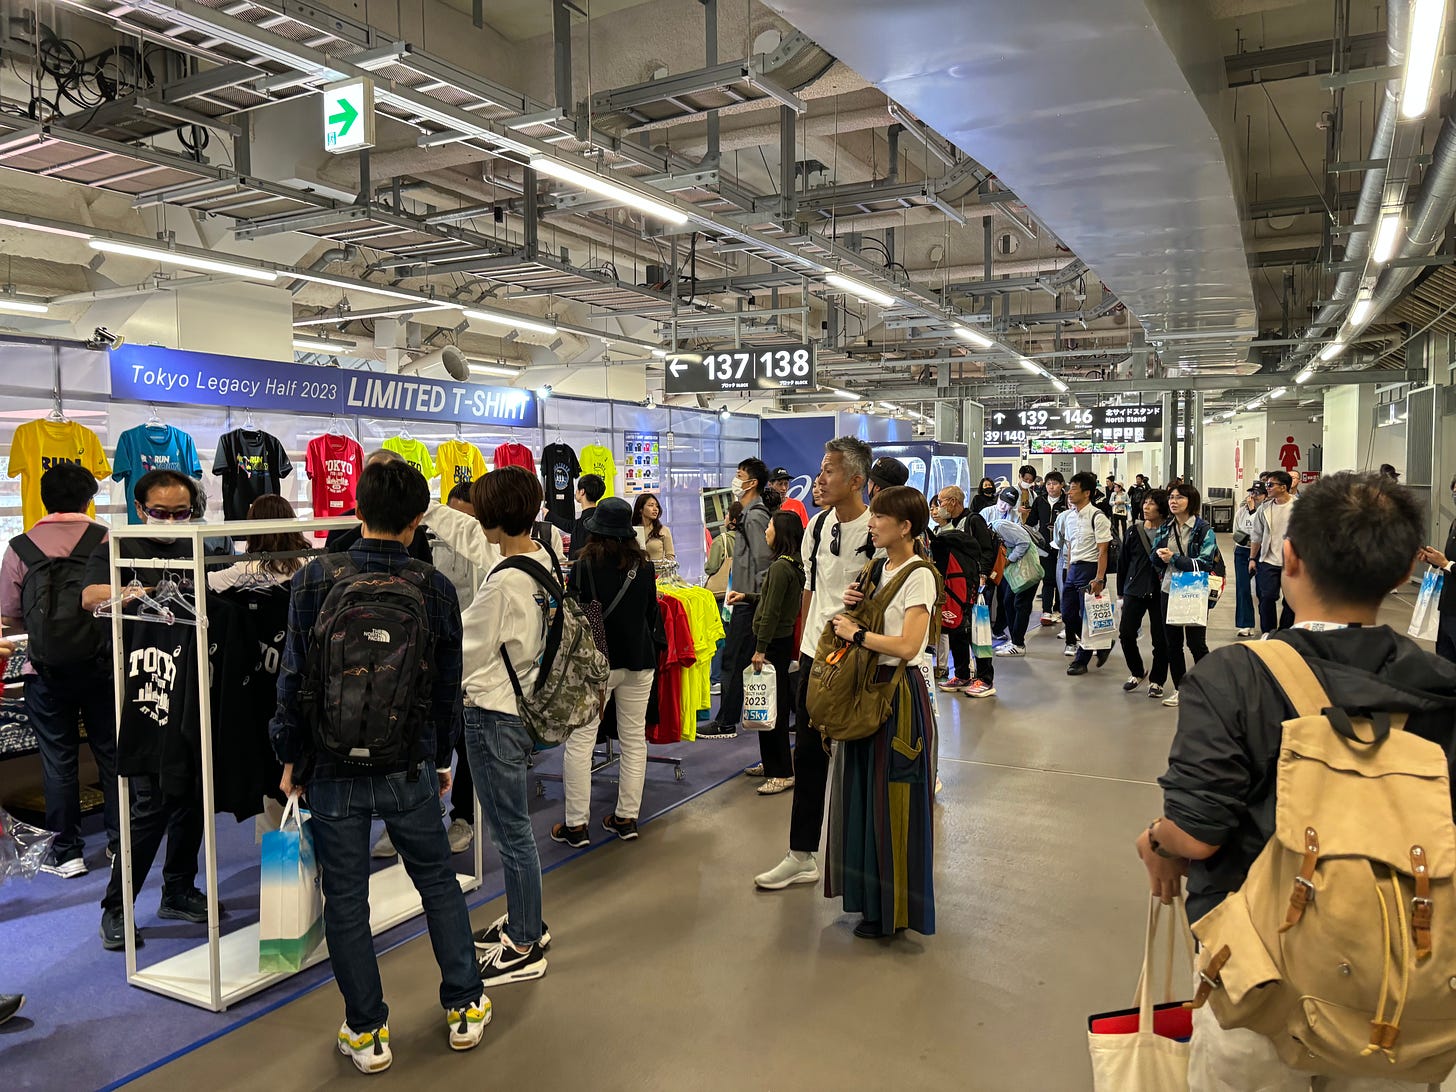 Runners at the Expo for the Tokyo Legacy Half Marathon.